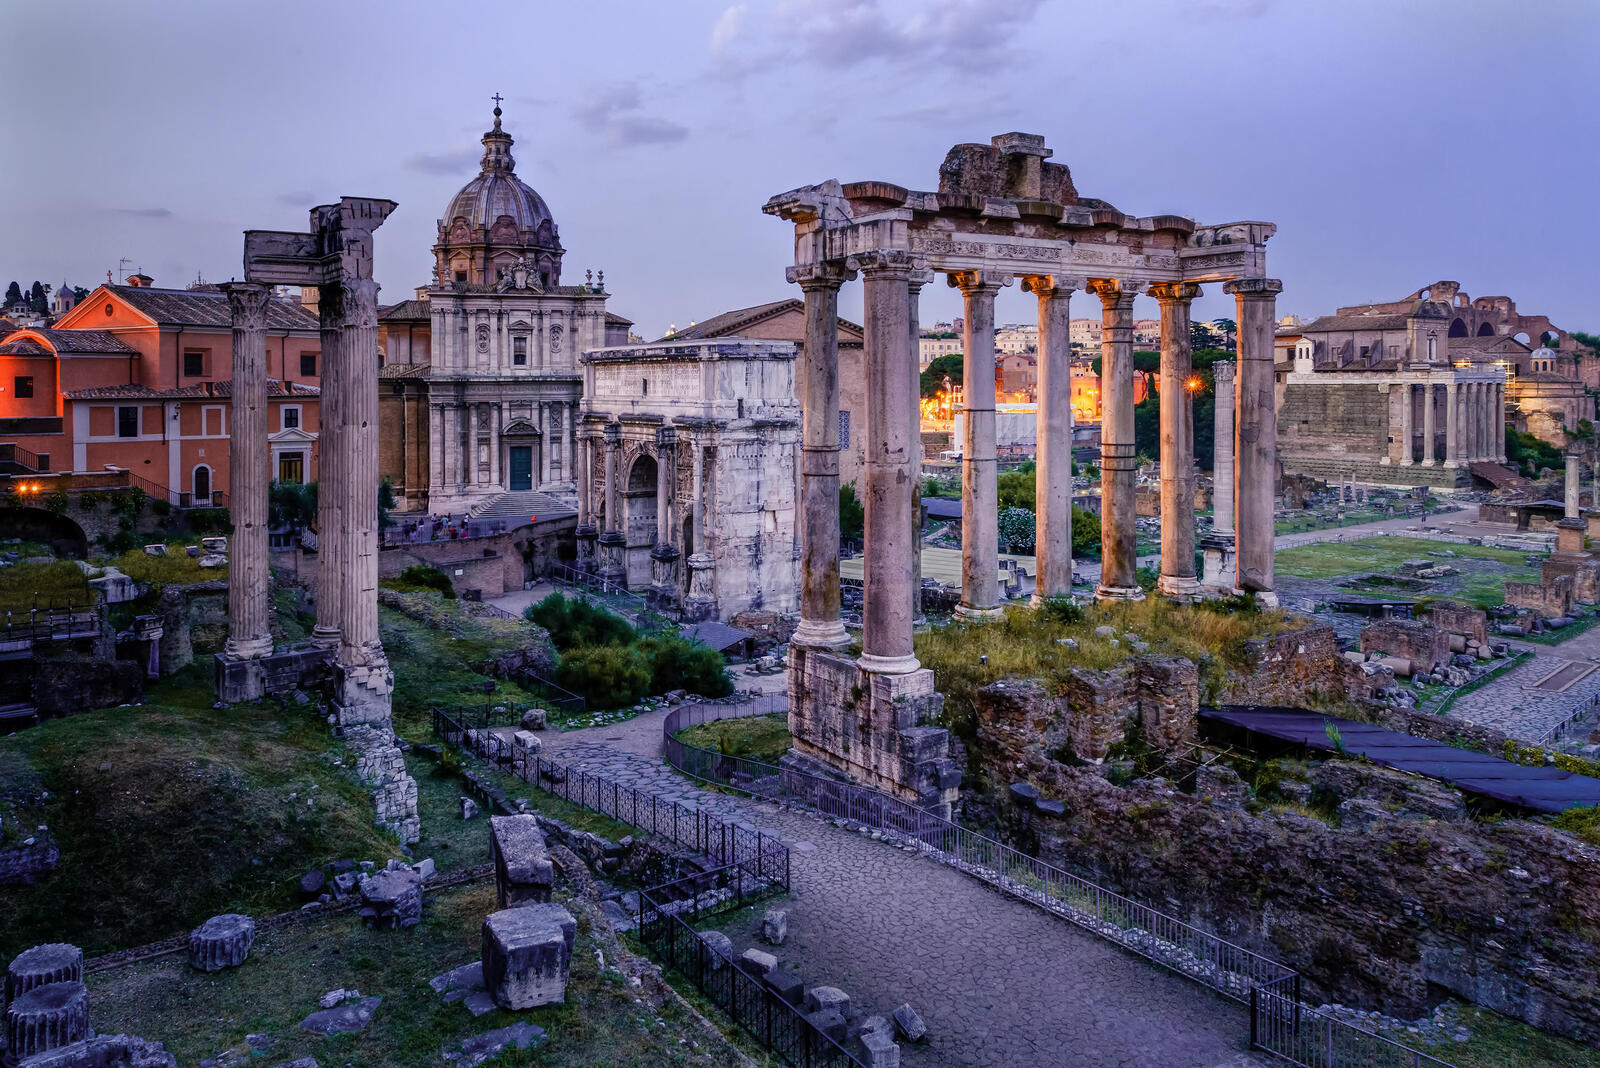 Wallpapers twilight Italy Rome on the desktop